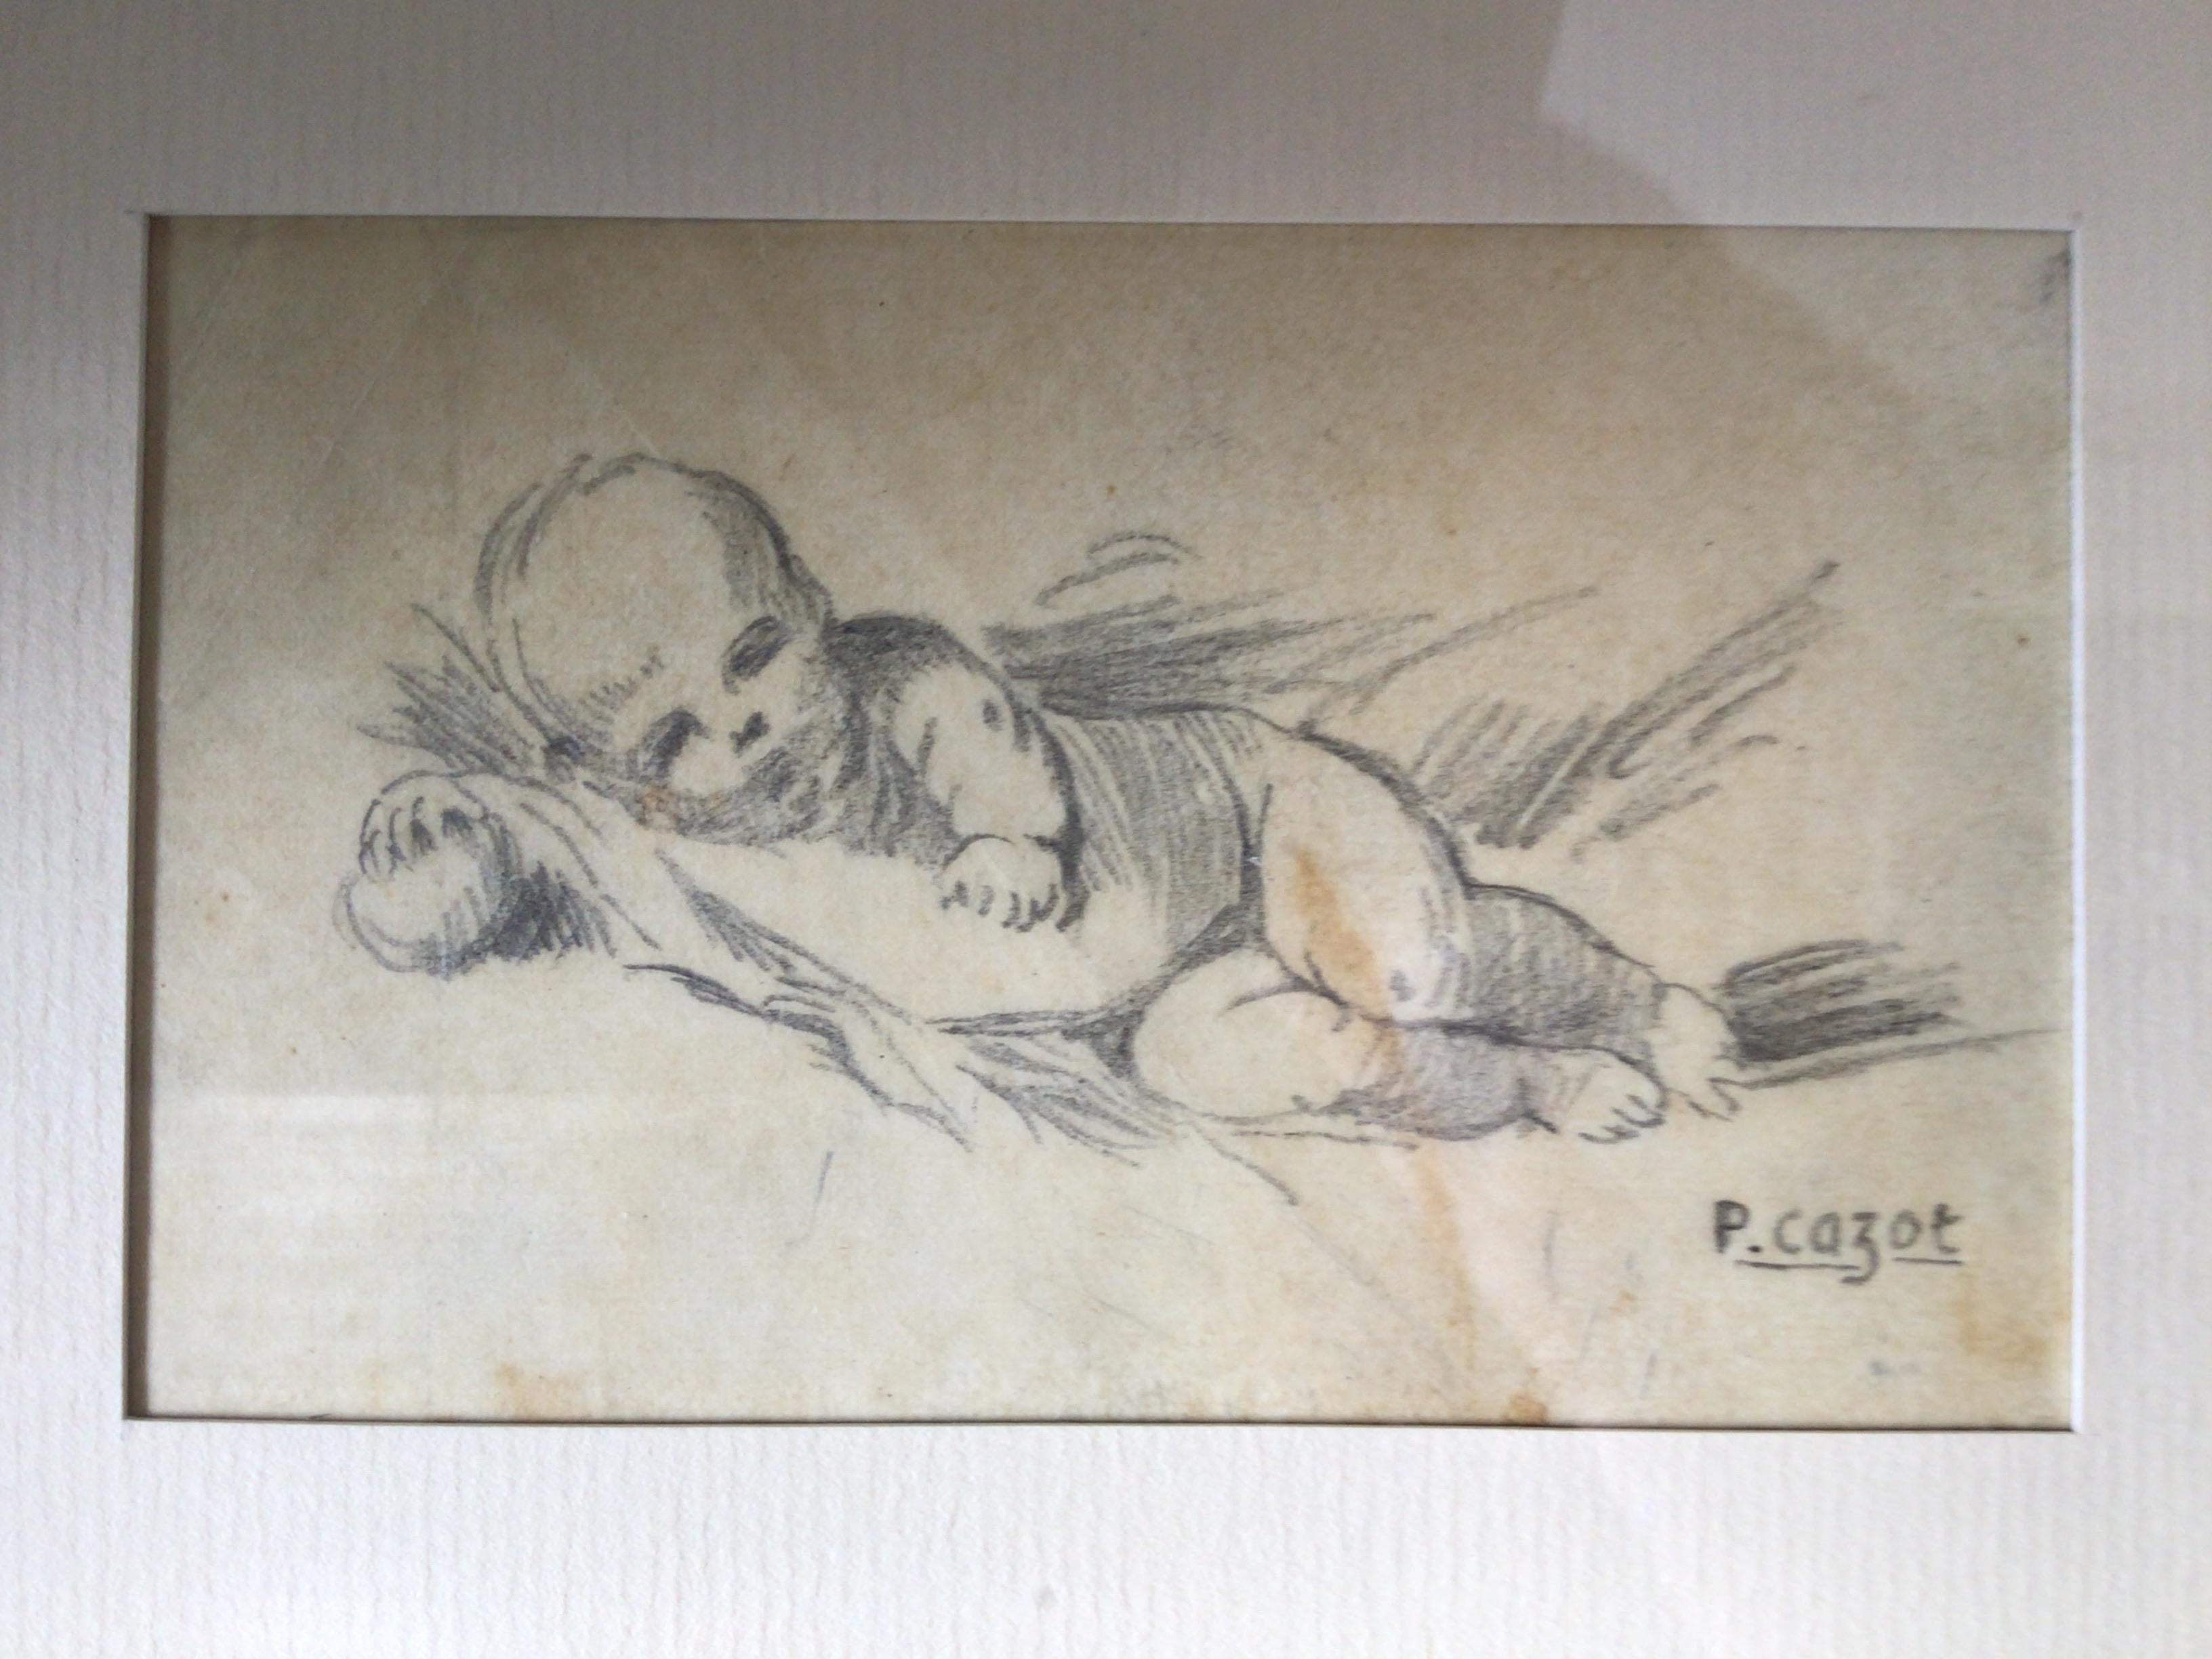 Pair of Sleeping Baby Drawings by P.Cazot In Good Condition For Sale In Tarrytown, NY